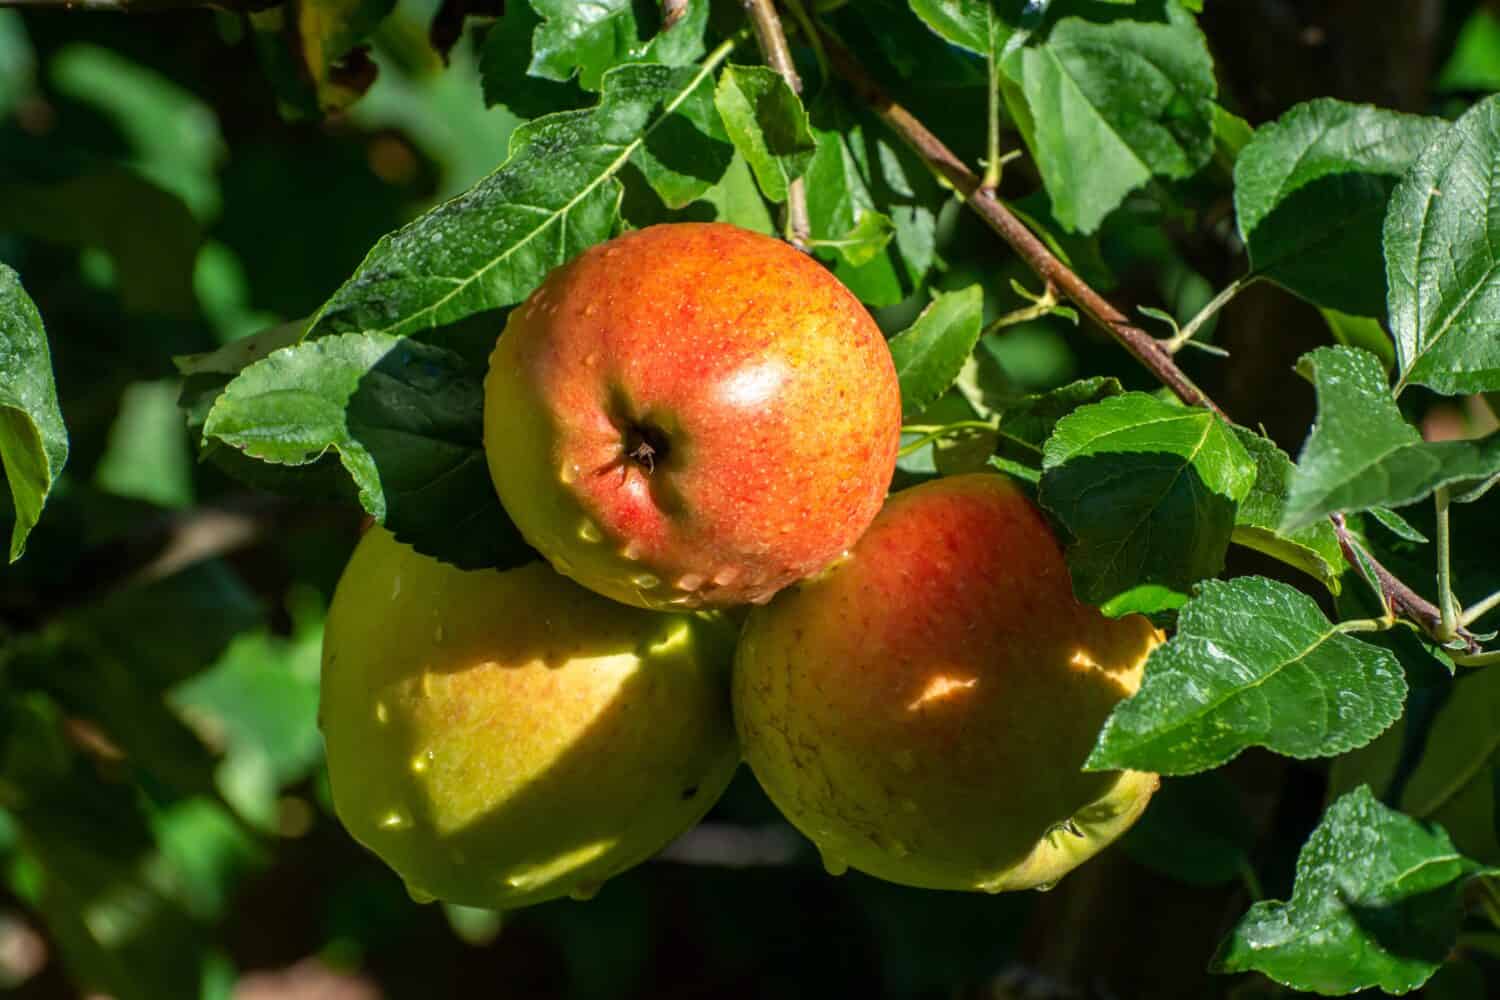 Sweet ripe braeburn apples ready to harvest in sunny orchard